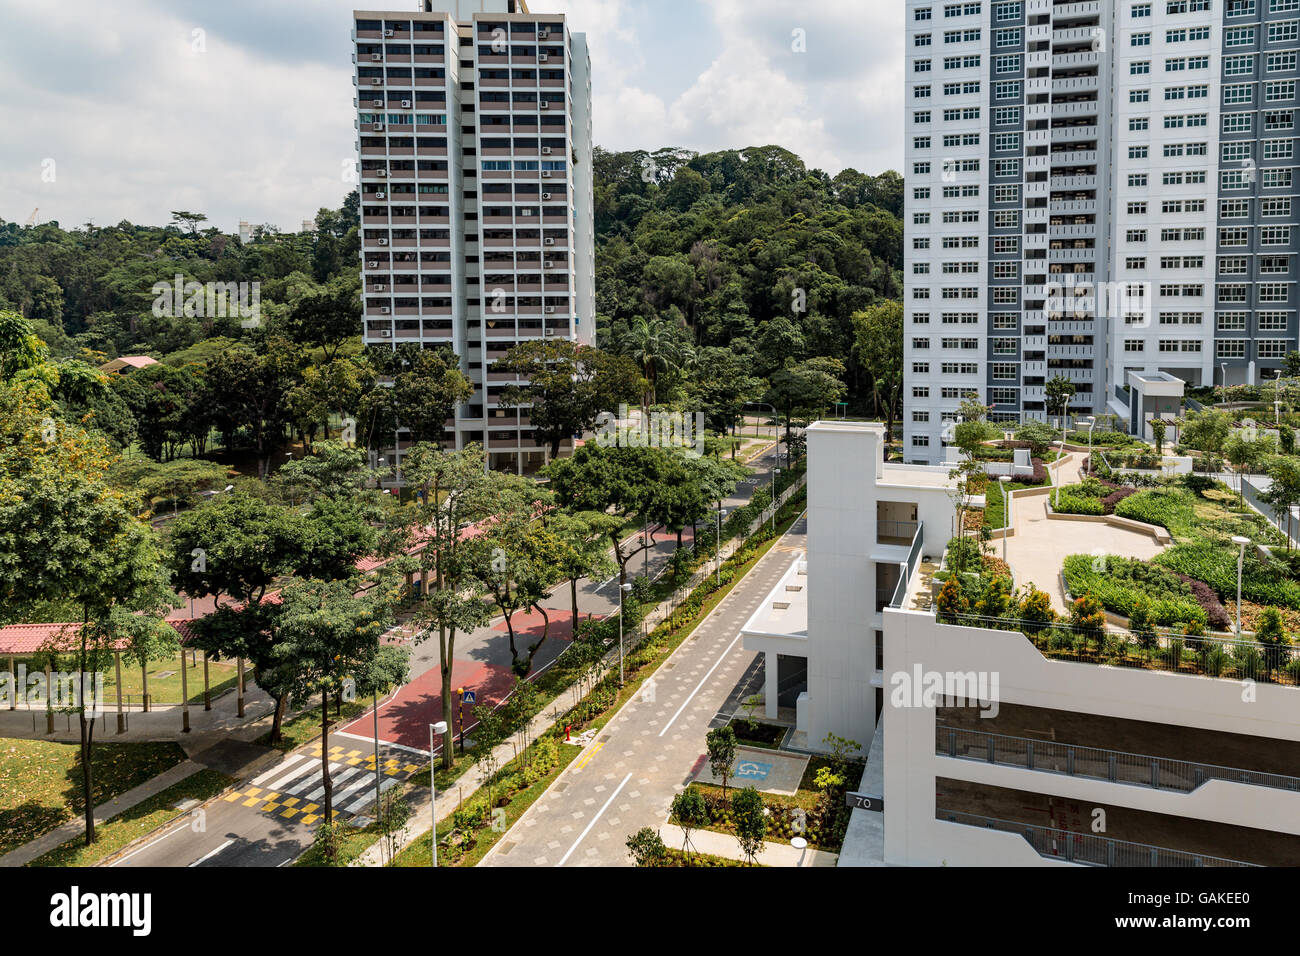 Roof Top Garden Above Car Park In New Singapore Public Housing